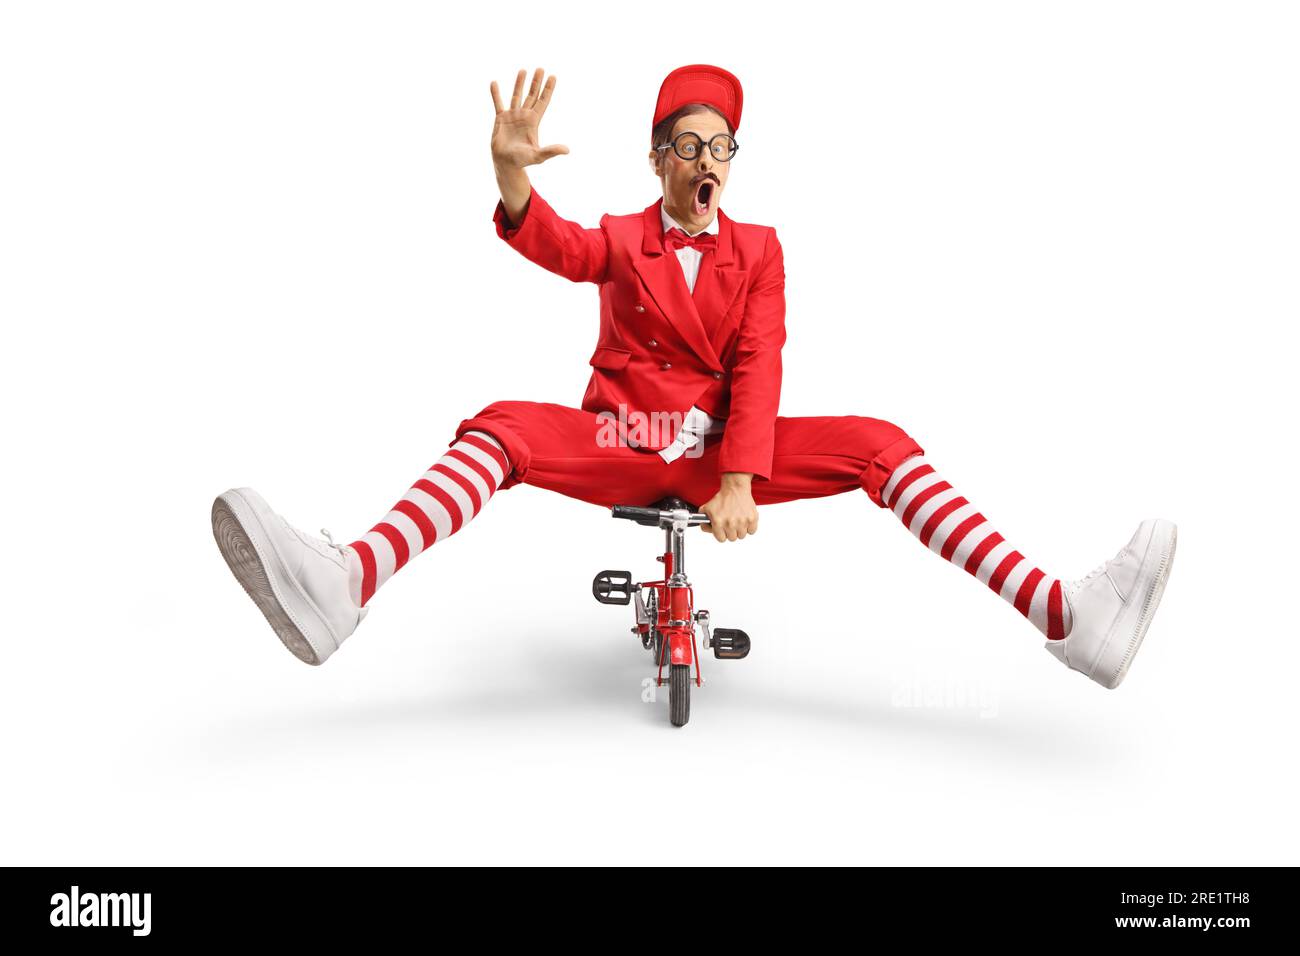 Entertainer in a red suit riding a small bike and waving isolated on white background Stock Photo